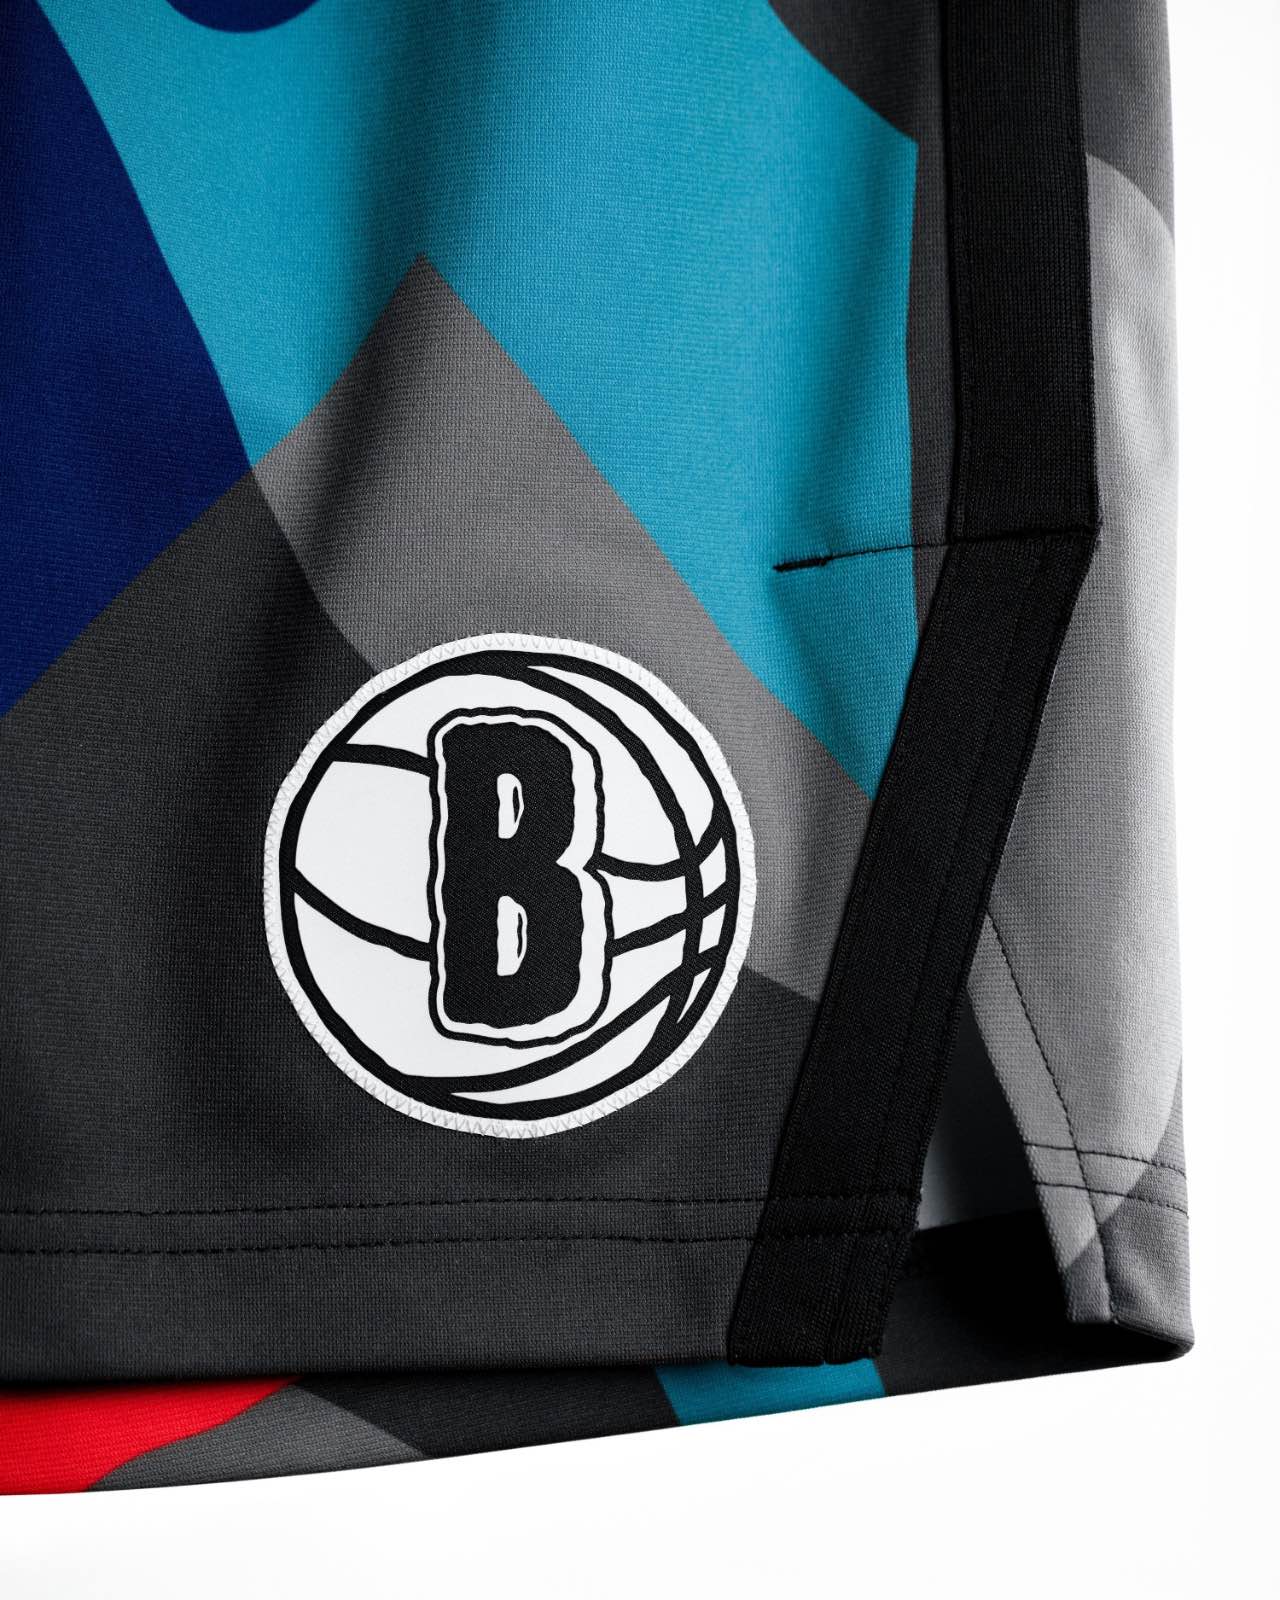 Out of Nowhere: Brooklyn Nets Release 23-24 City Edition Jersey Early